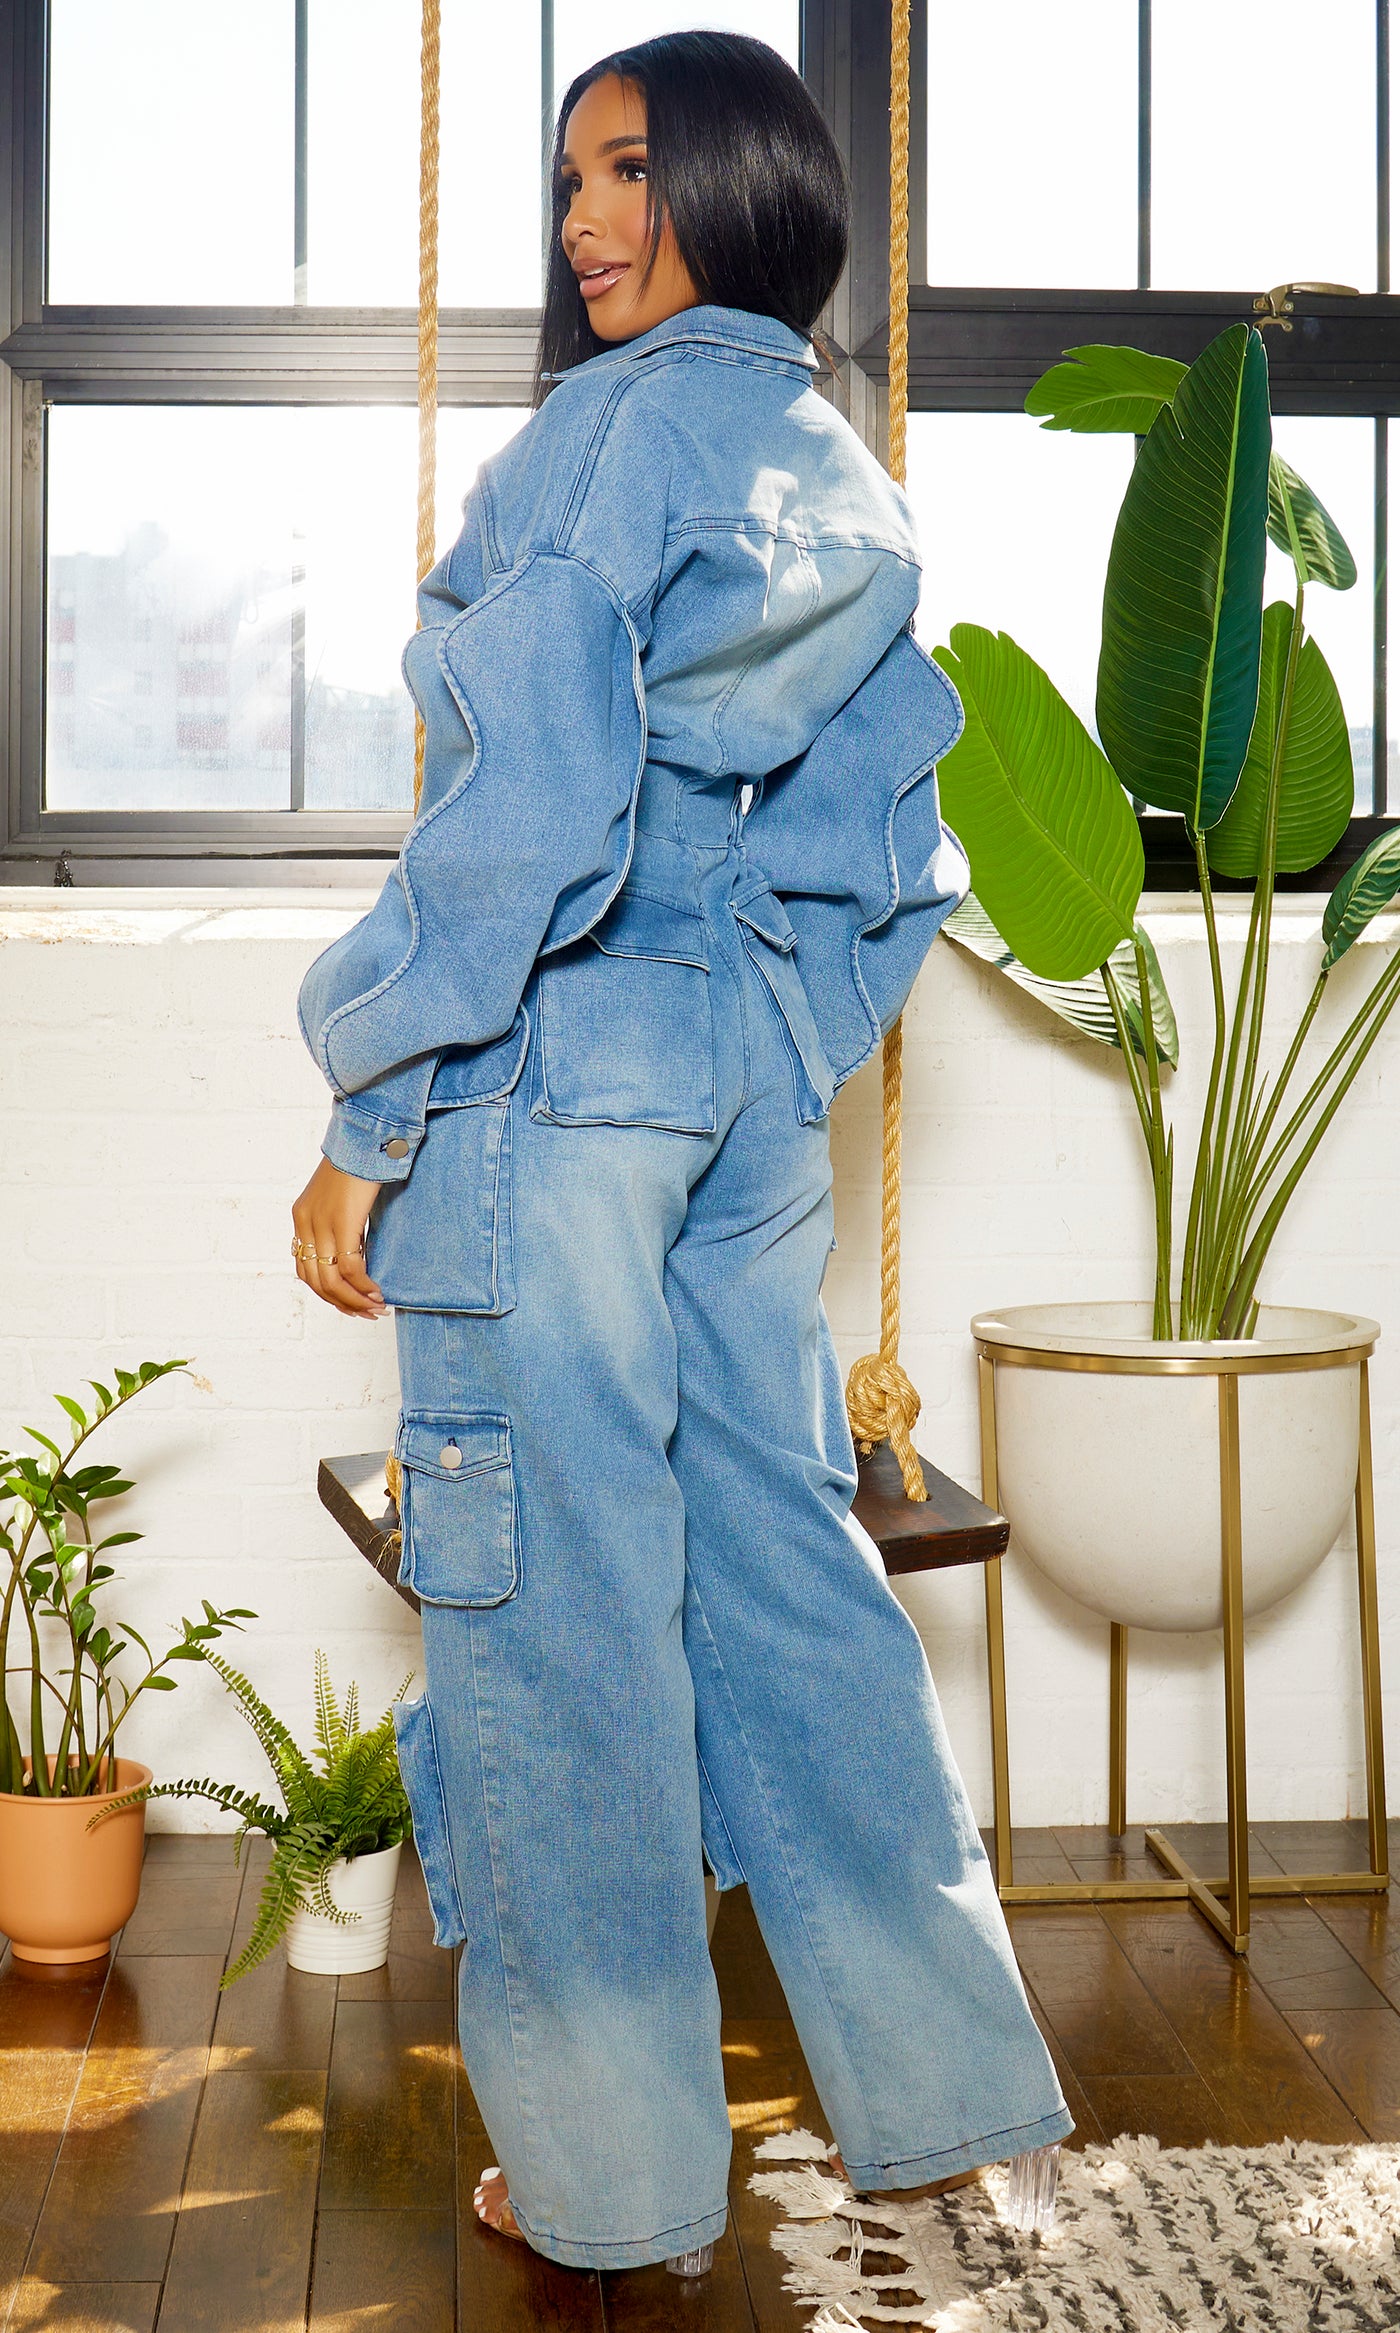 Long Wave Sleeve Cargo Denim Jumpsuit - Medium Wash PREORDER Ships End October - Cutely Covered